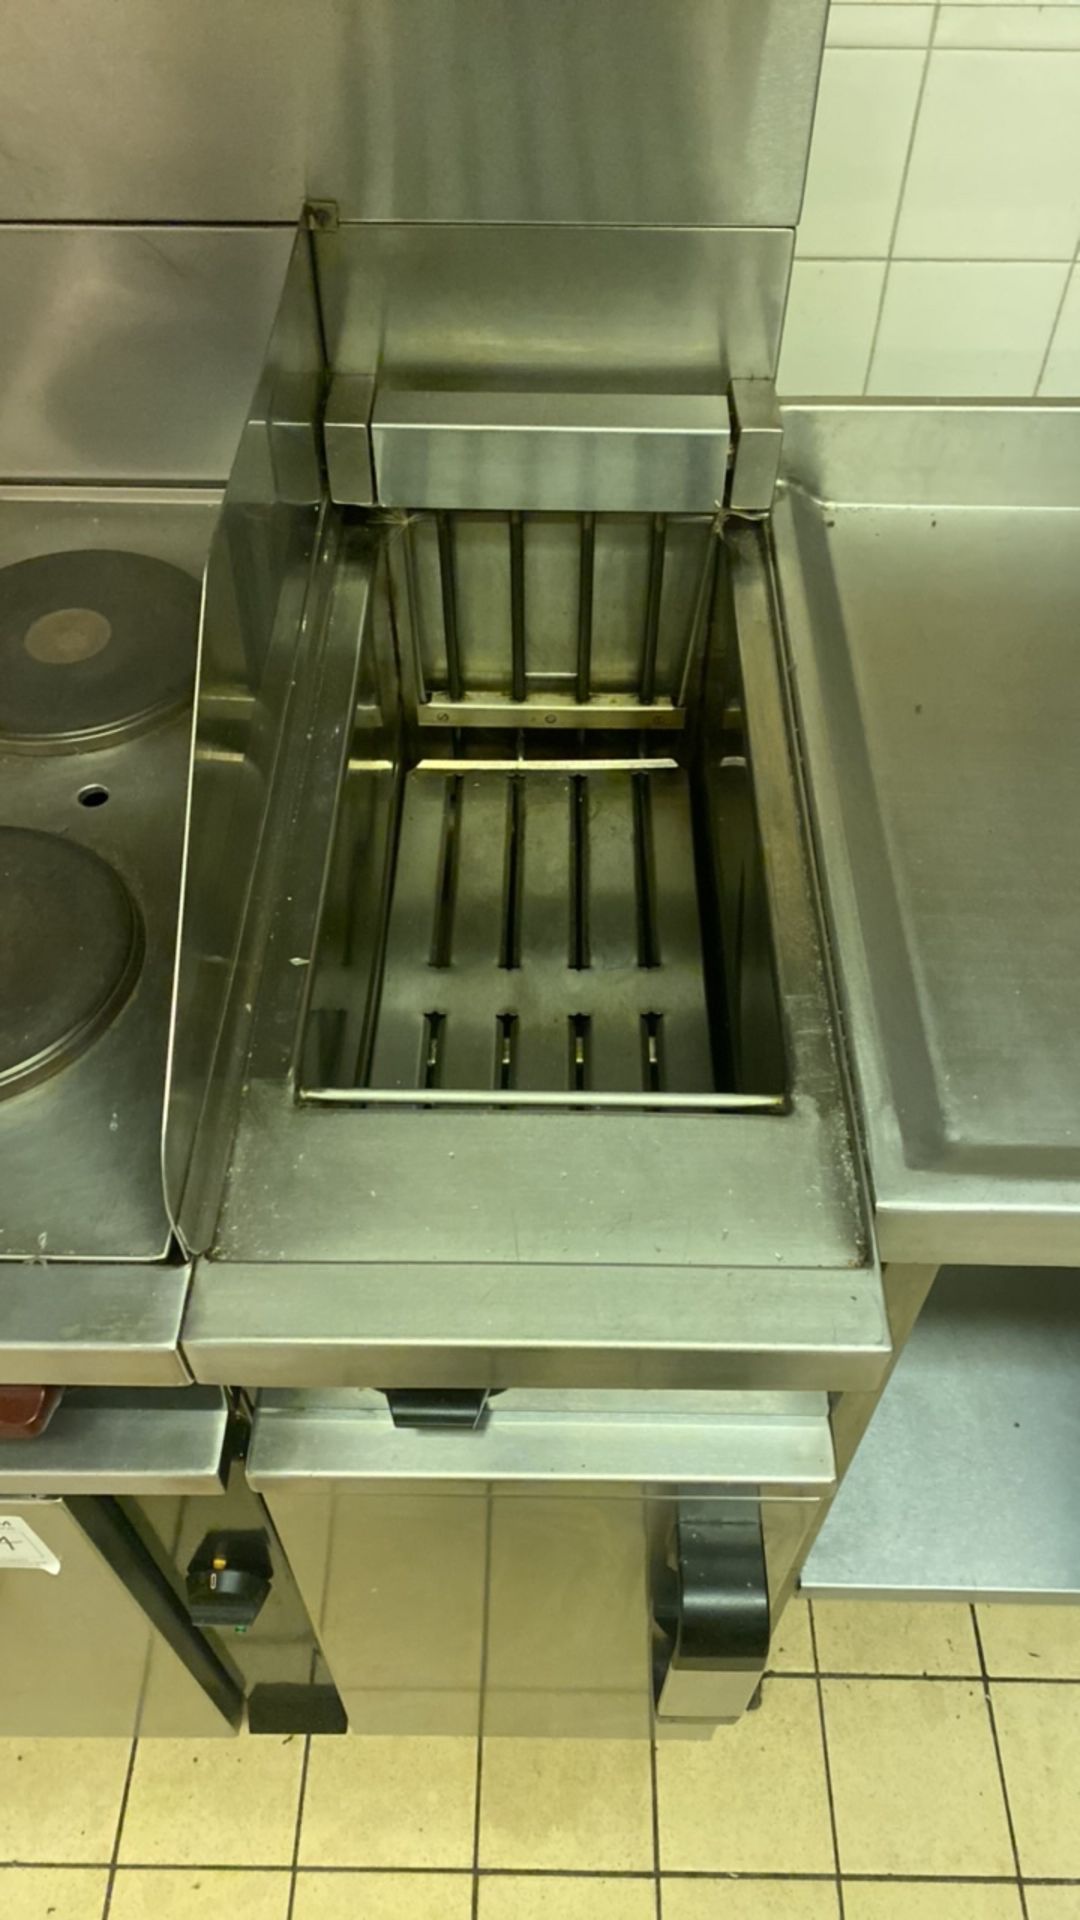 Morewood M Line Plus Solid Top Oven with Fryer - Image 5 of 5